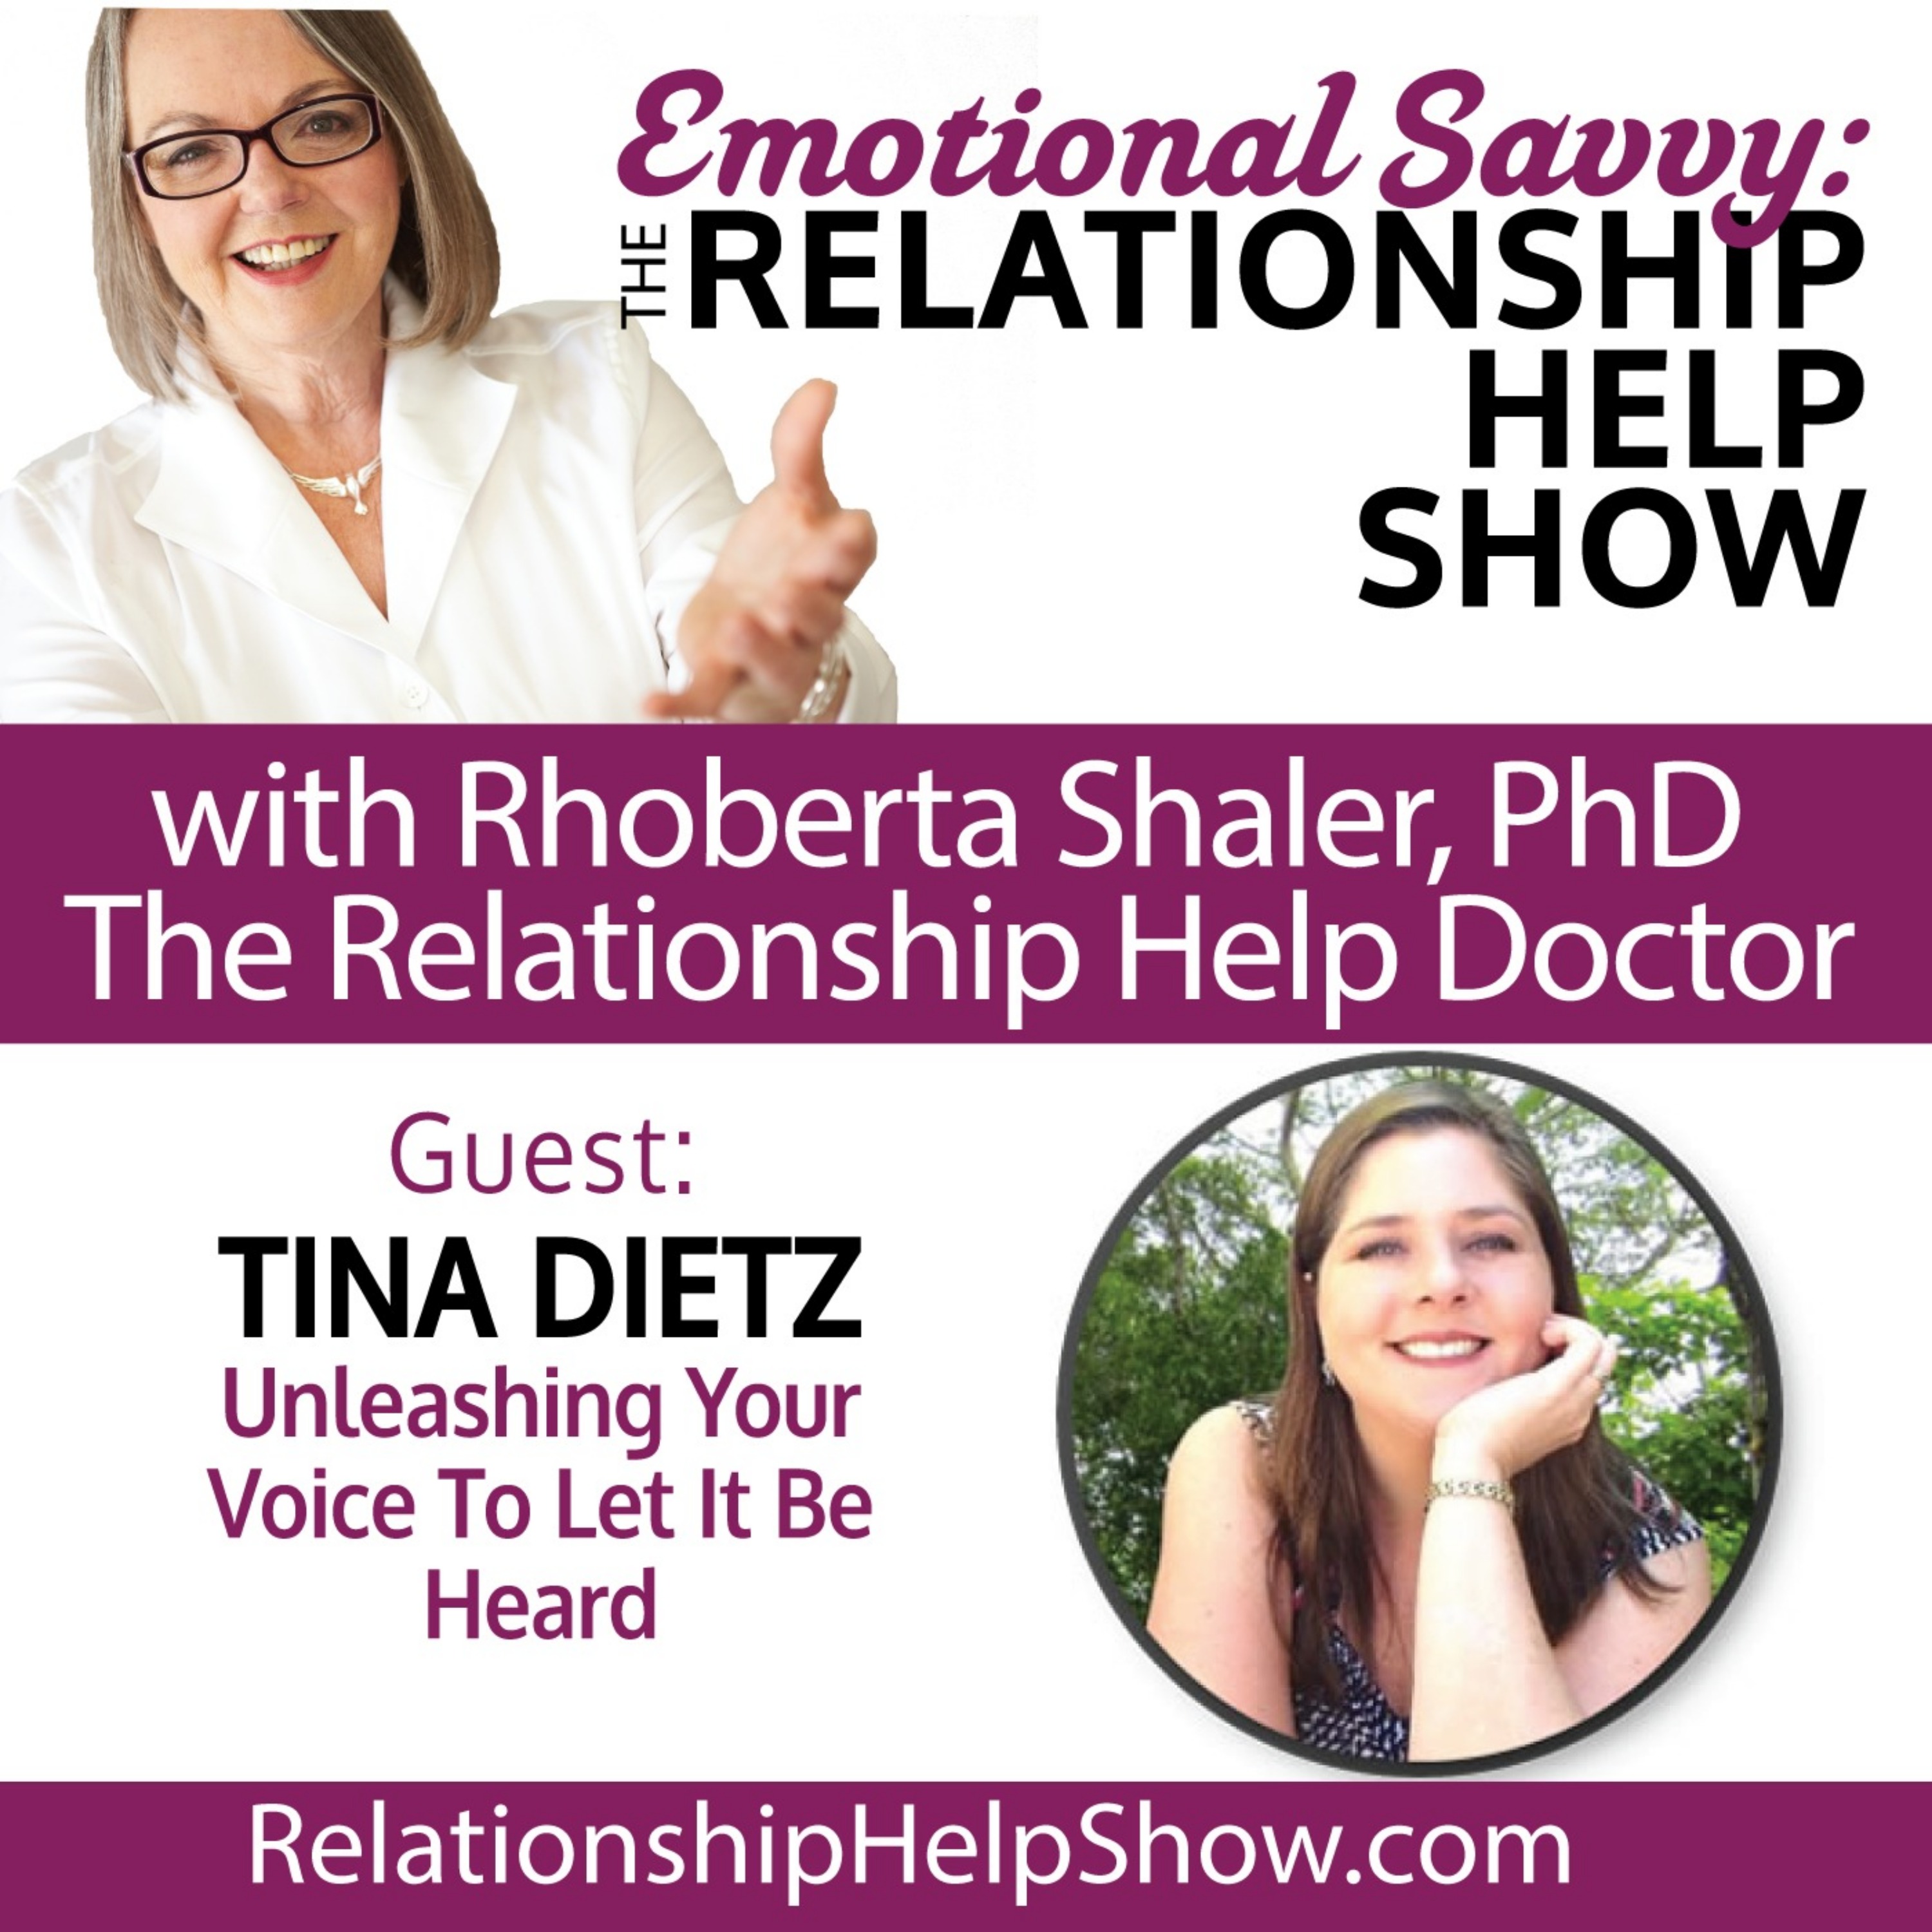 How to Speak Up Powerfully When You Want Things to Change  GUEST: Tina Dietz